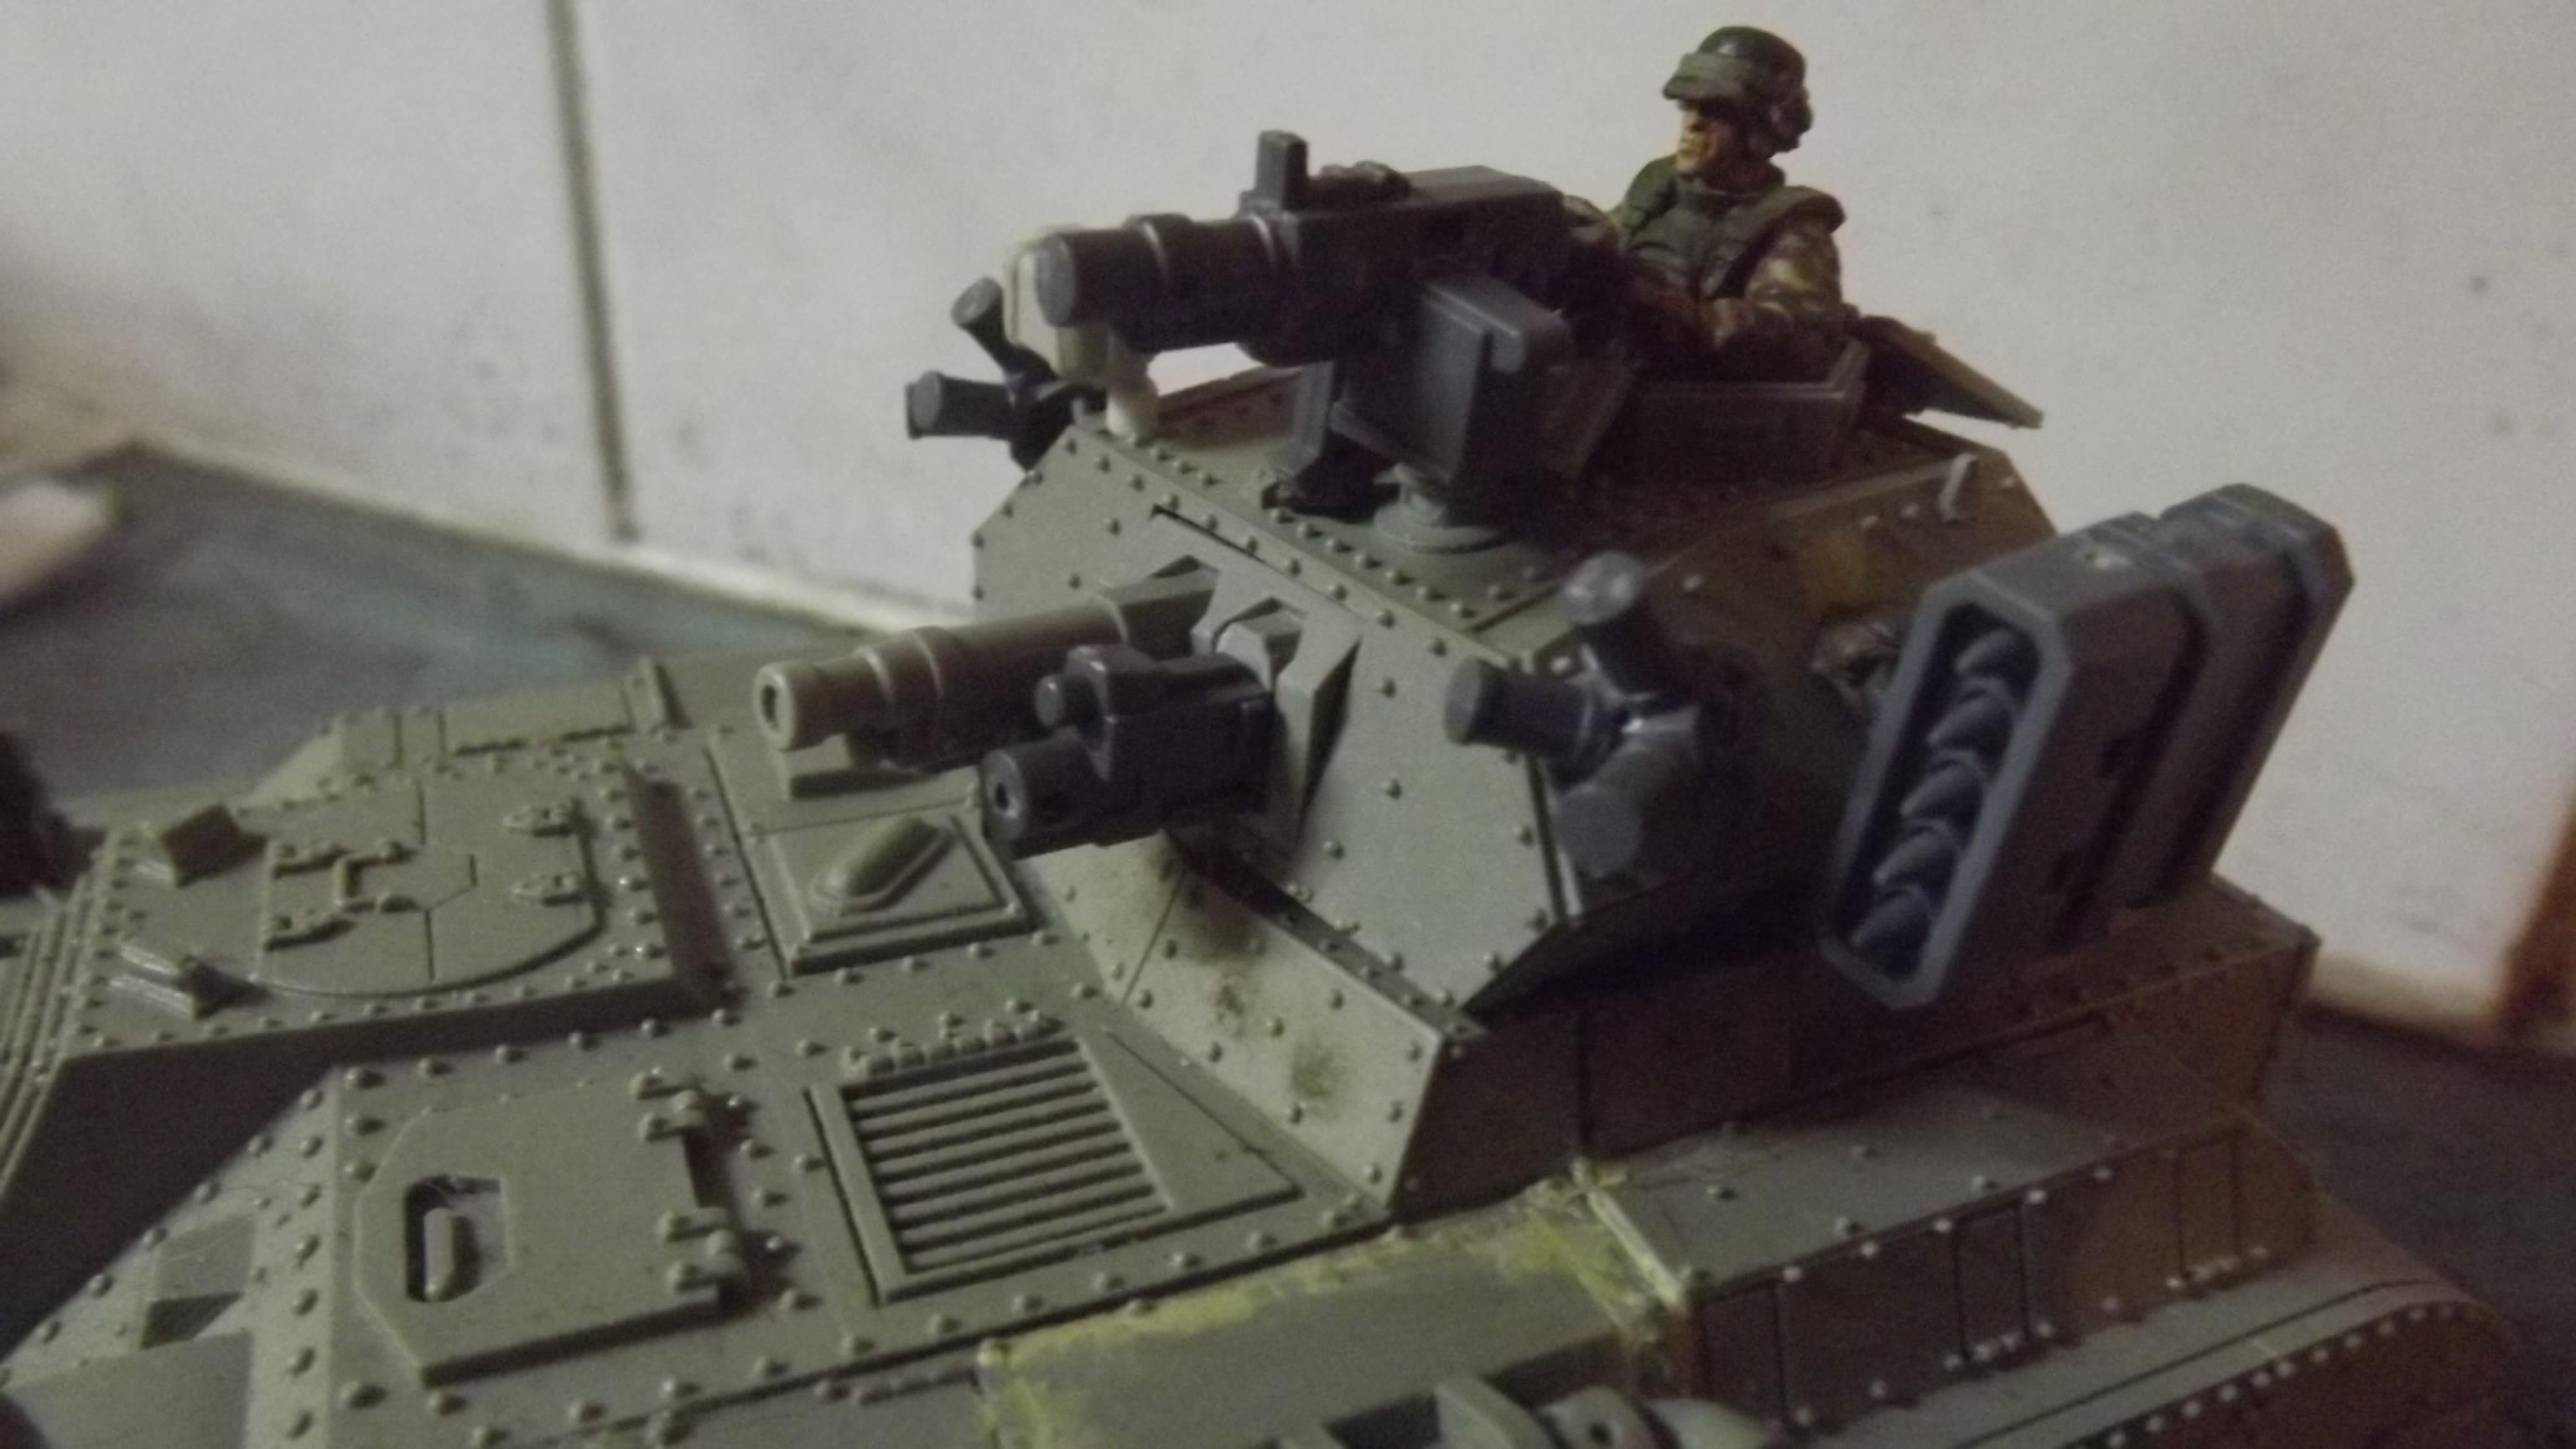 Chimera, Conversion, Heavy Bolter, Ifv, Infantry Fighting Vehicle, Kangaroo, Transport, Victoria Miniatures